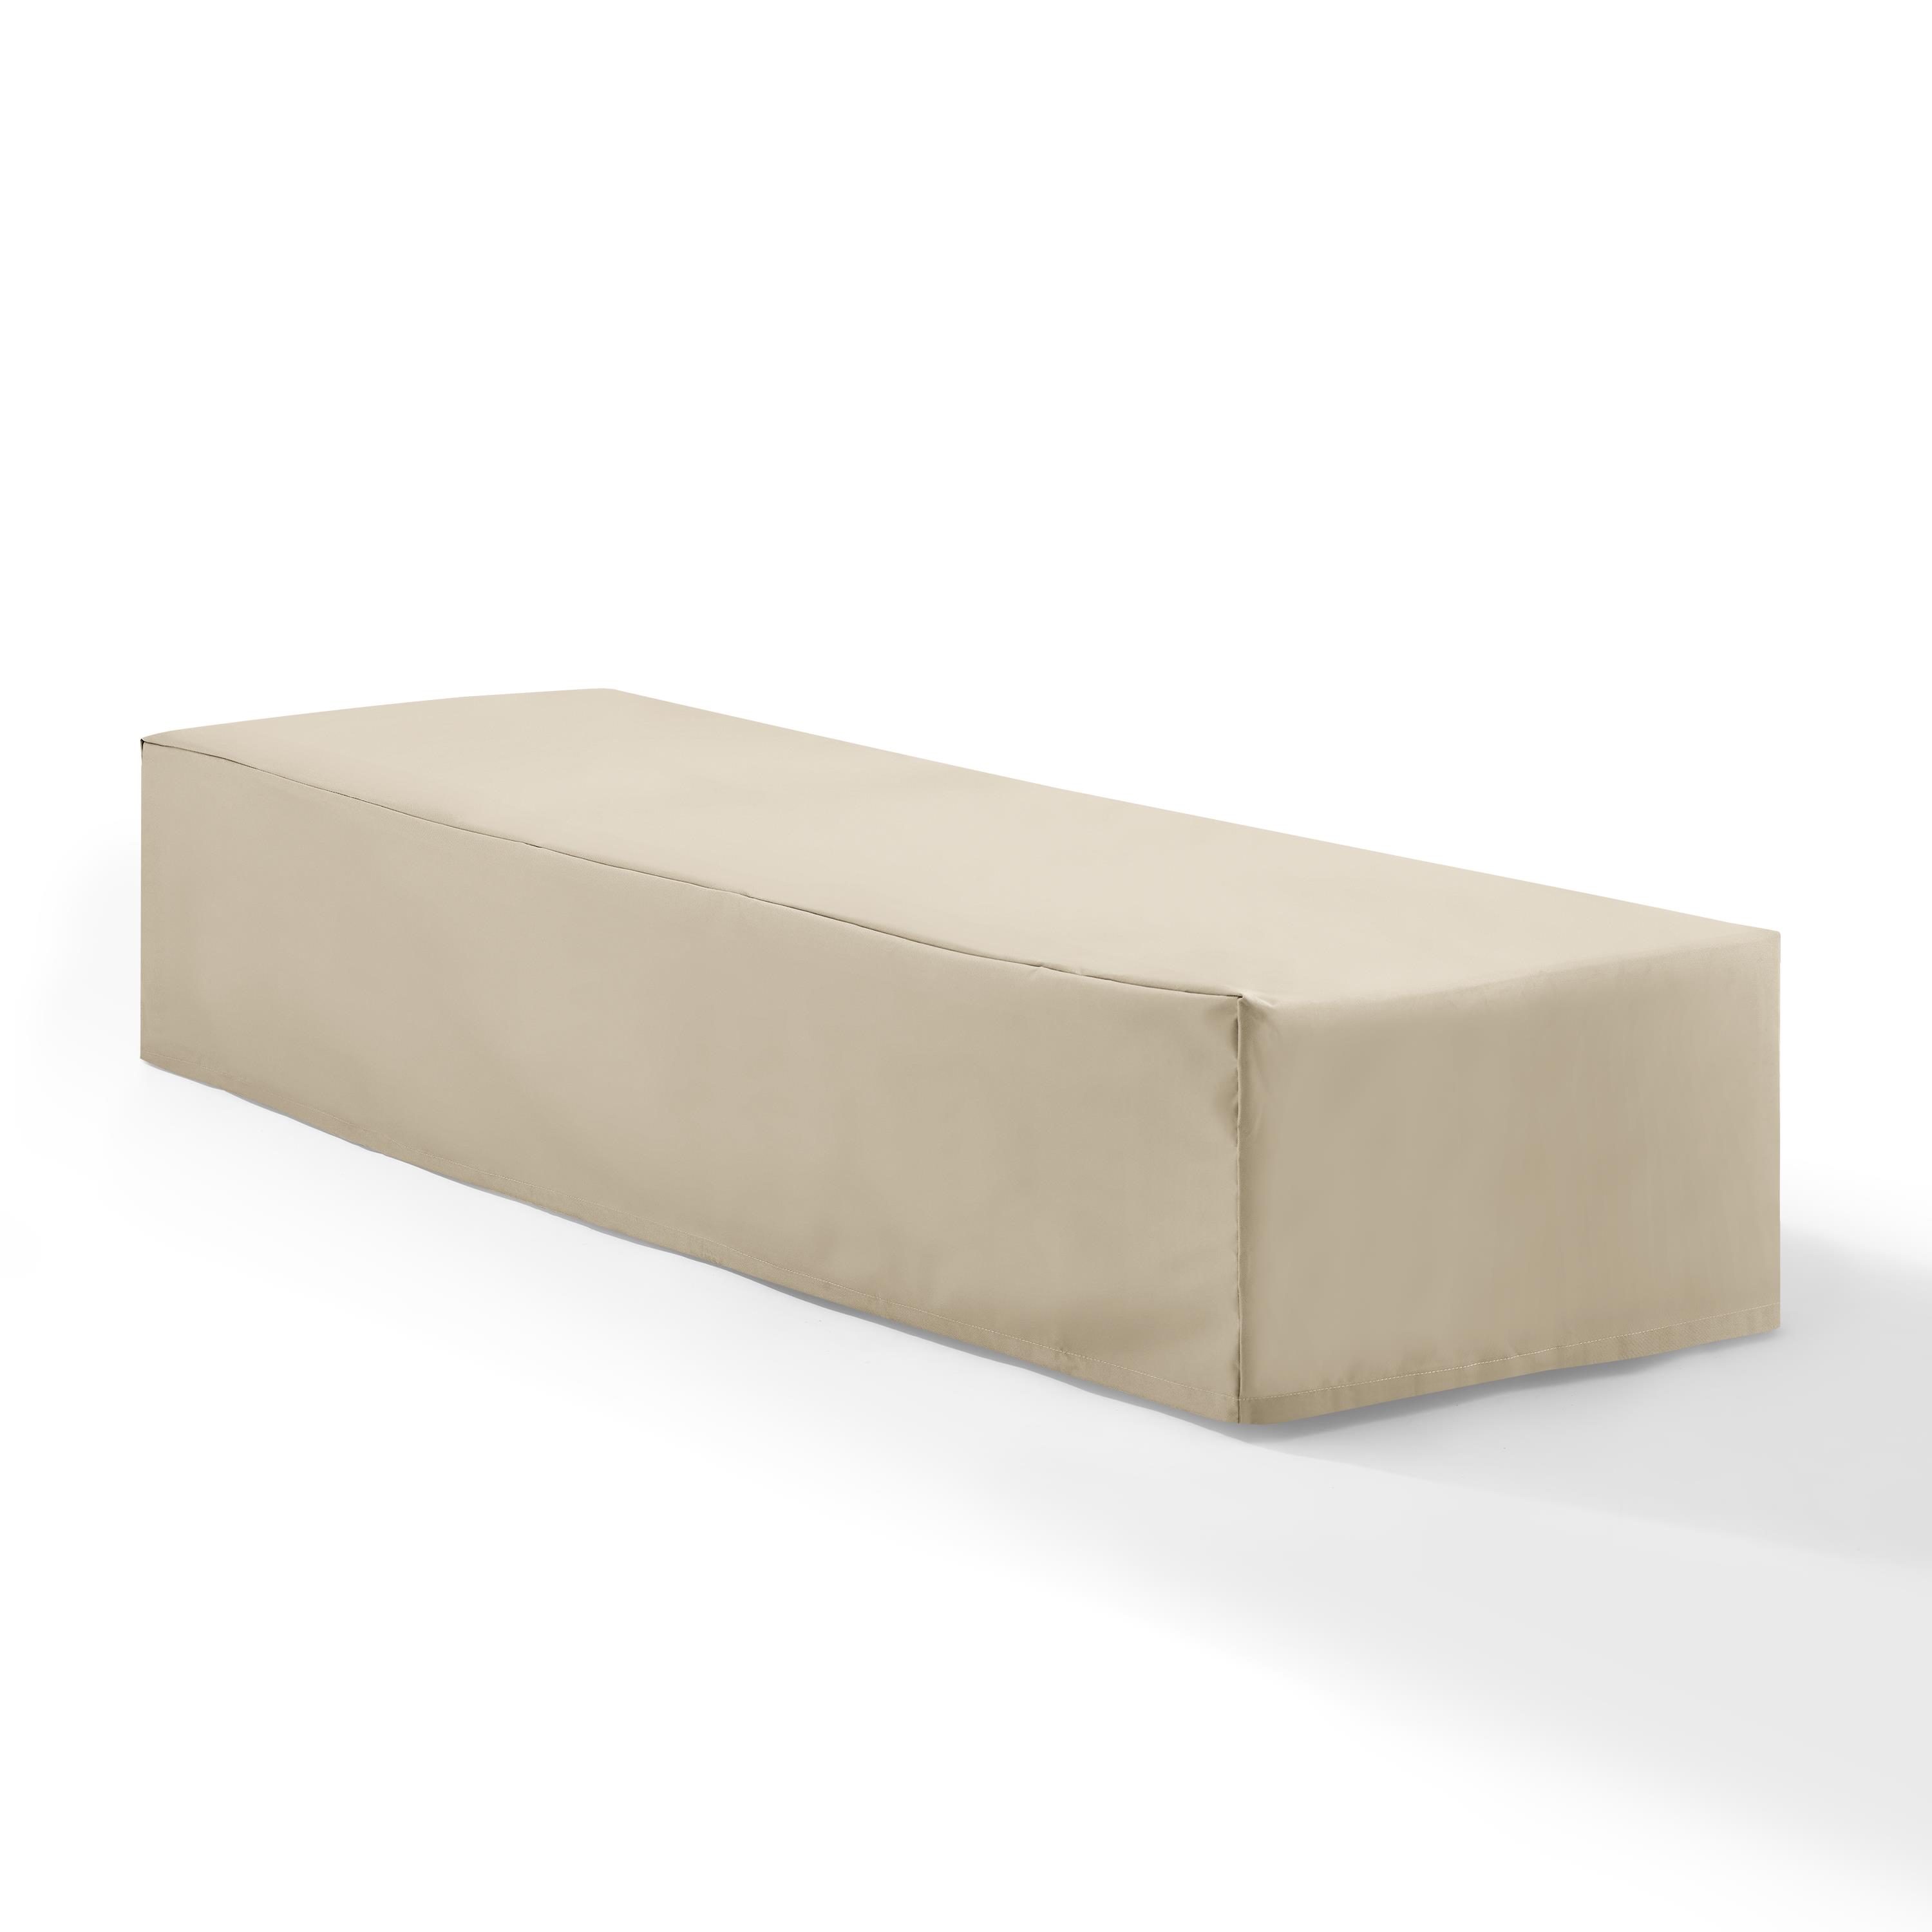 Crosley Brands  Outdoor Chaise Lounge Furniture Cover, Tan - image 4 of 7